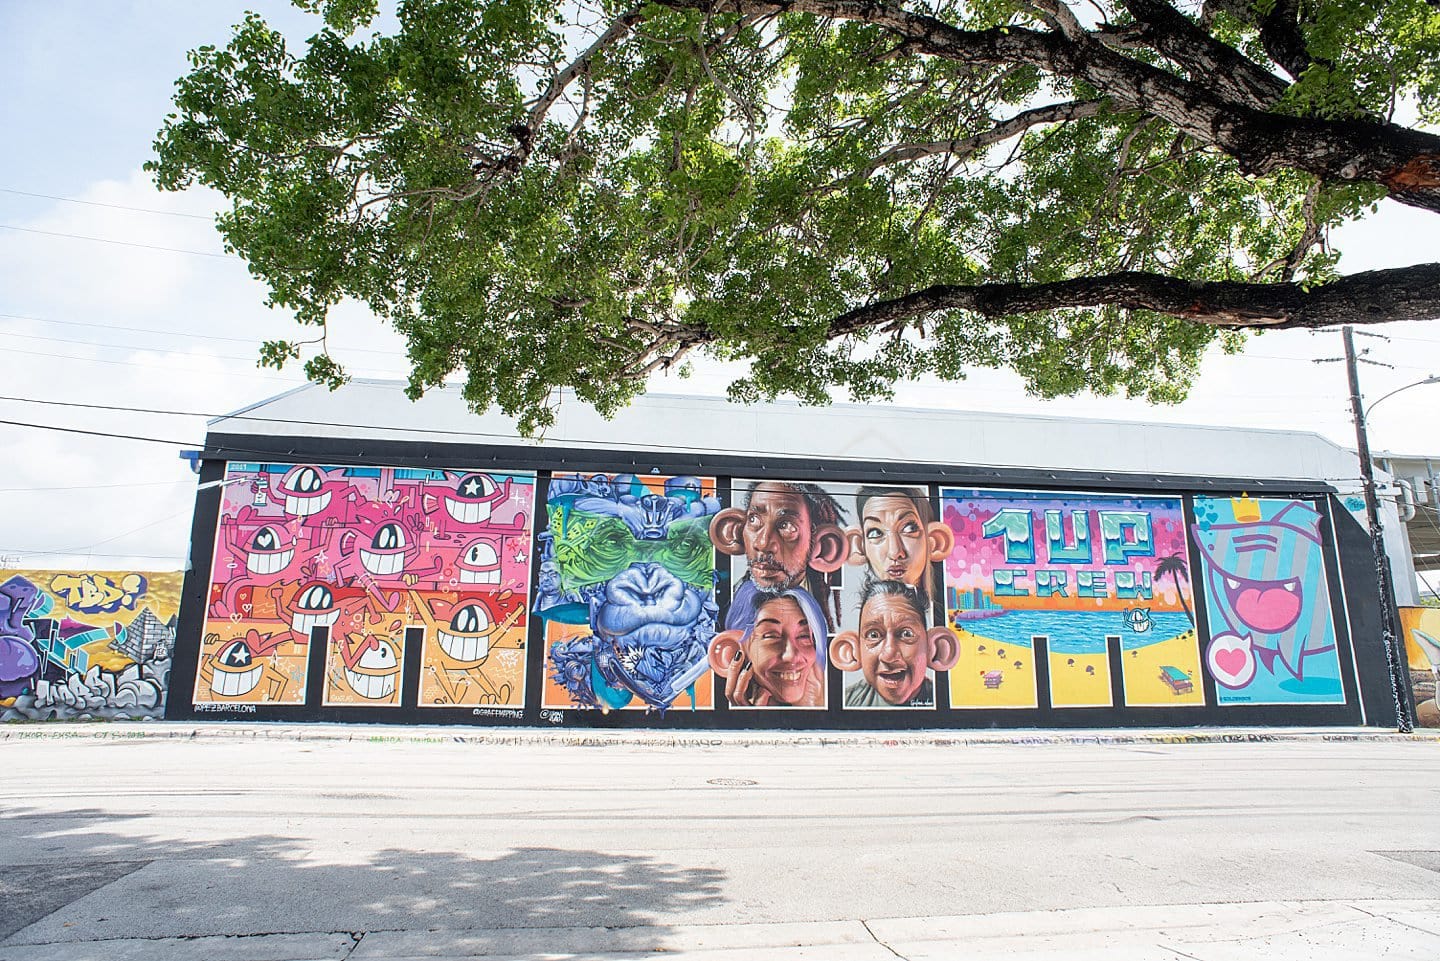 Fun Things to Do in Wynwood, Miami in Addition to Seeing Murals